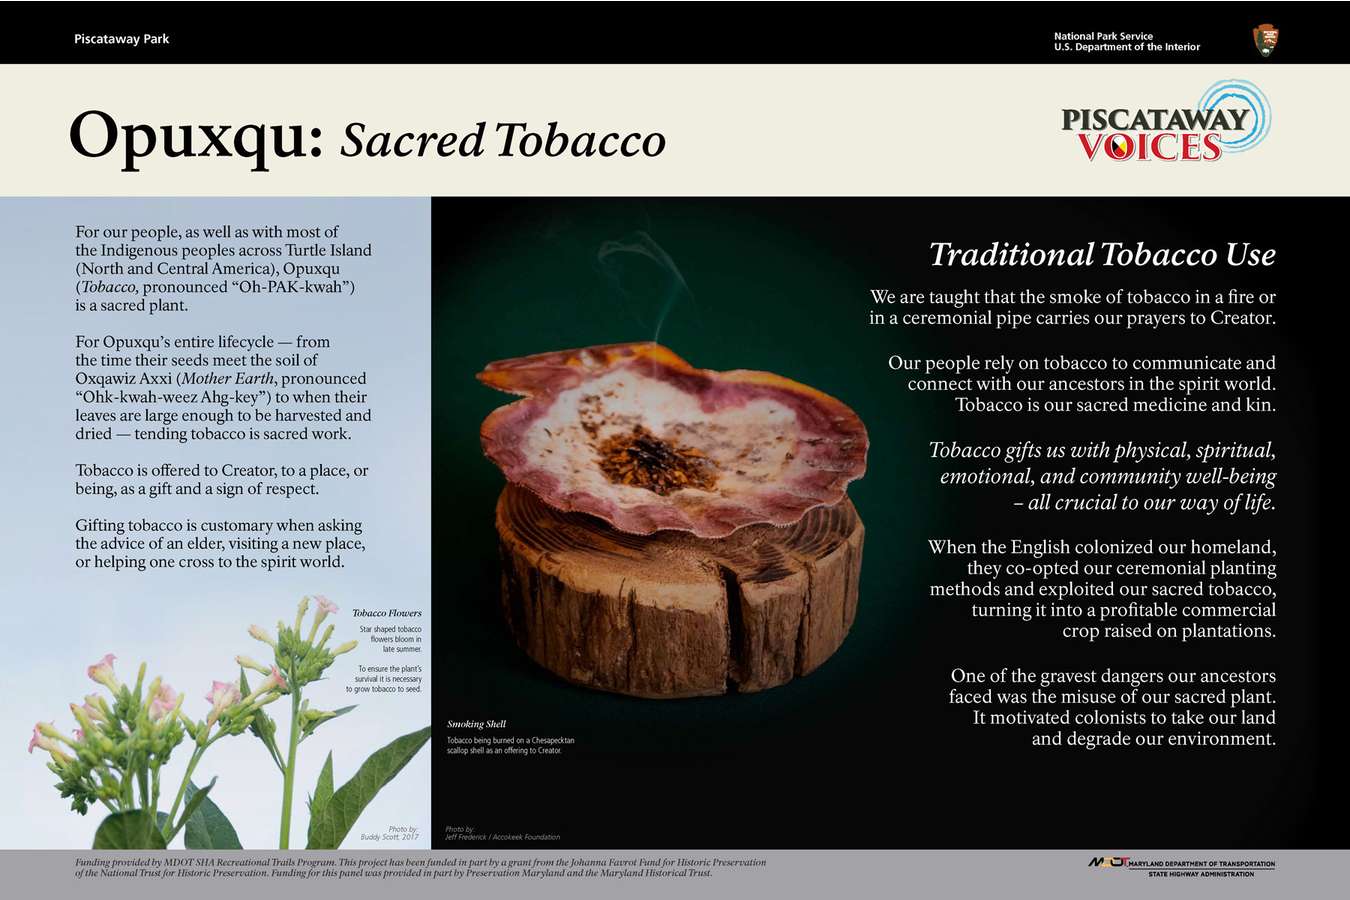 5 Tobacco : Sacred Tobacco is used as a gift and sign of respect among the Piscataway People.